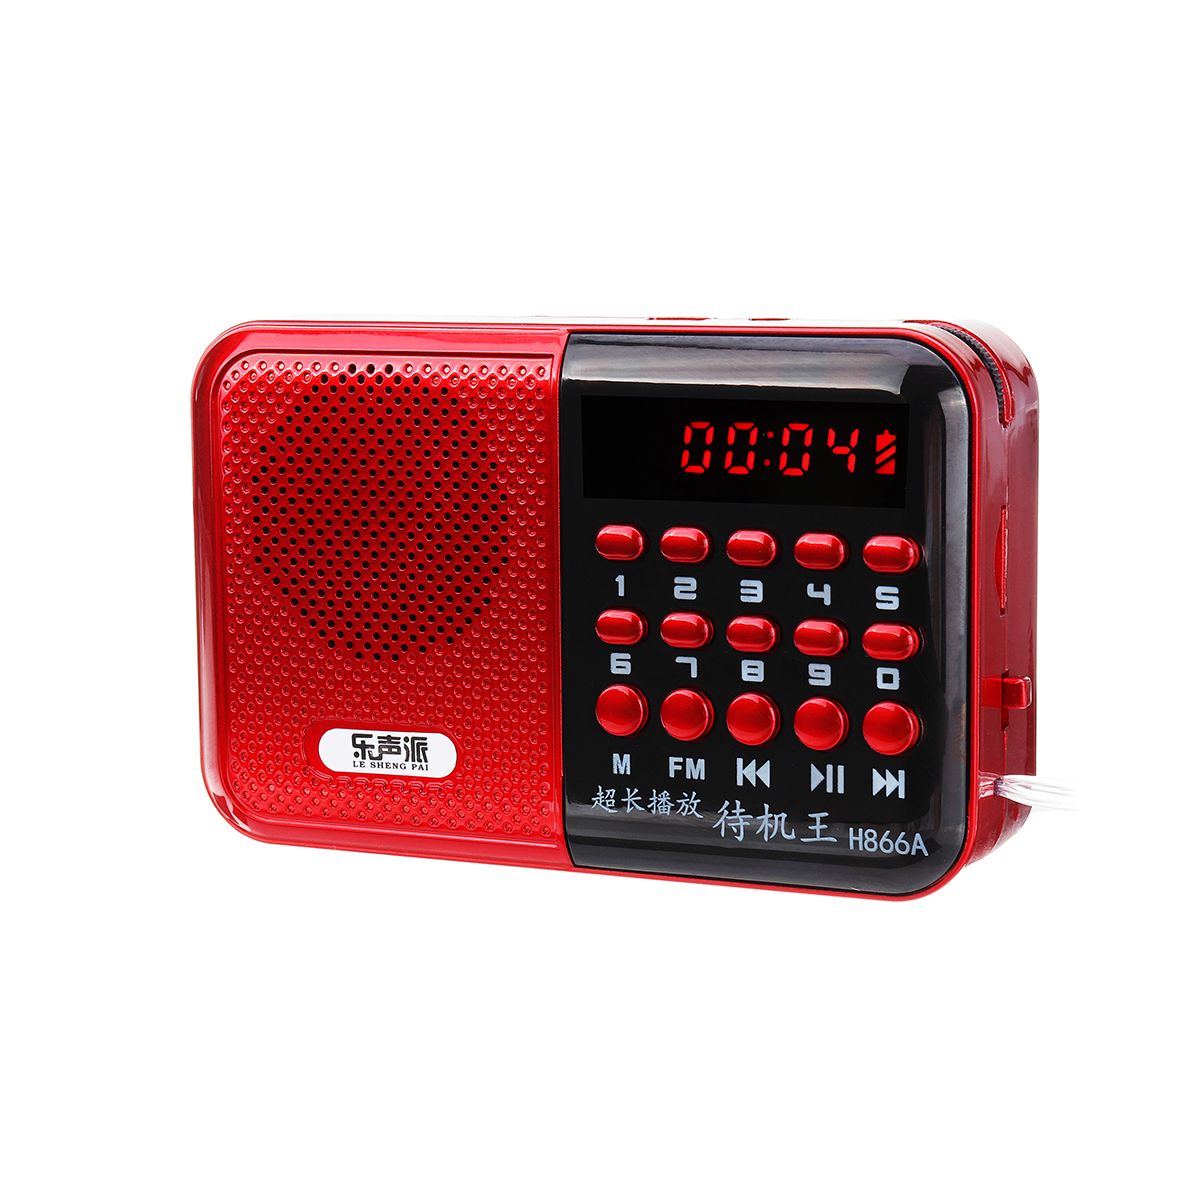 Portable-DC-5V-3W-FM-70MHz-108MHz-Handheld-Digital-Radio-Music-Player-Rechargeable-TF-Card-Speaker-1568350